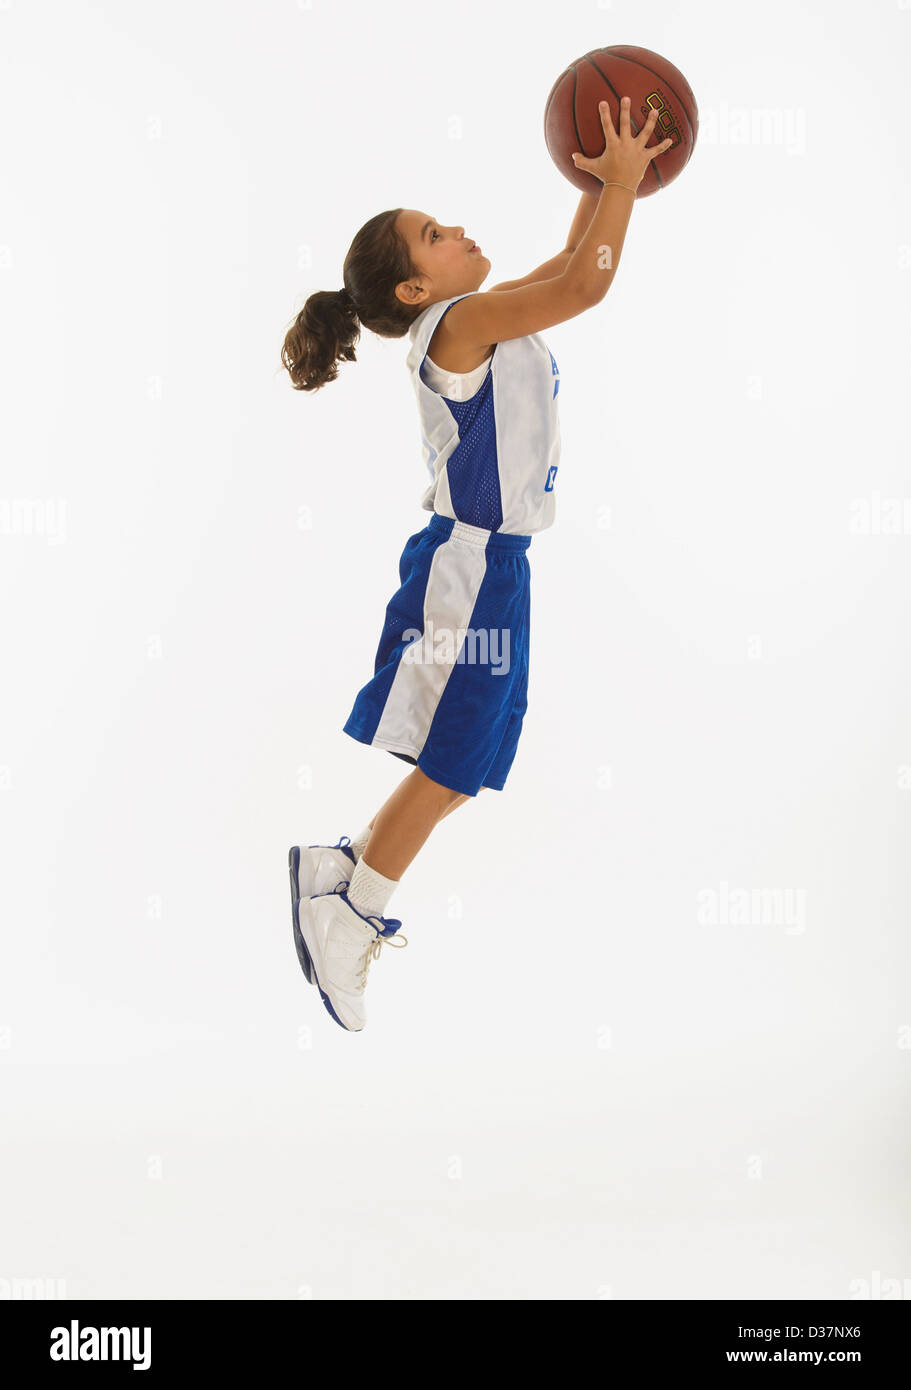 Side view of girl (8-9 years) playing basketball Stock Photo